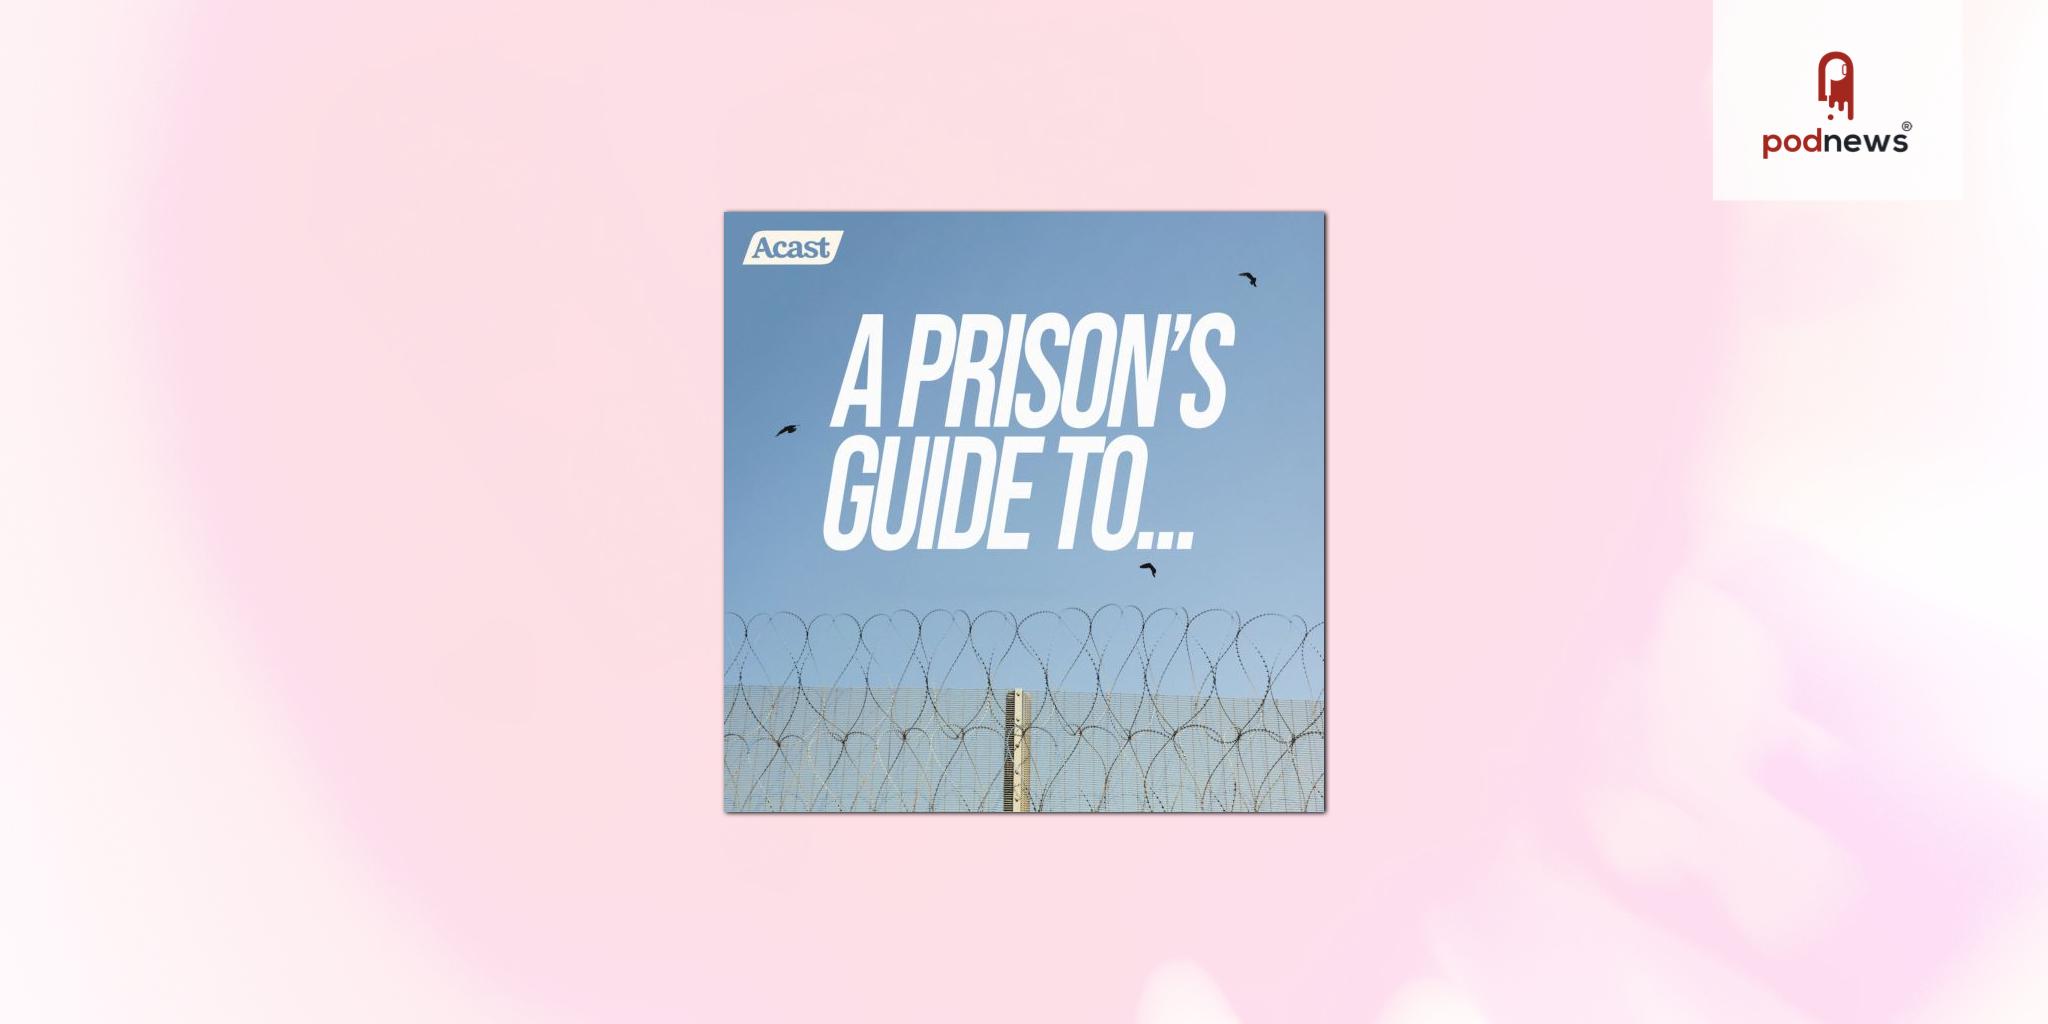 New podcast highlights how prison staff protect the public and help break the cycle of crime